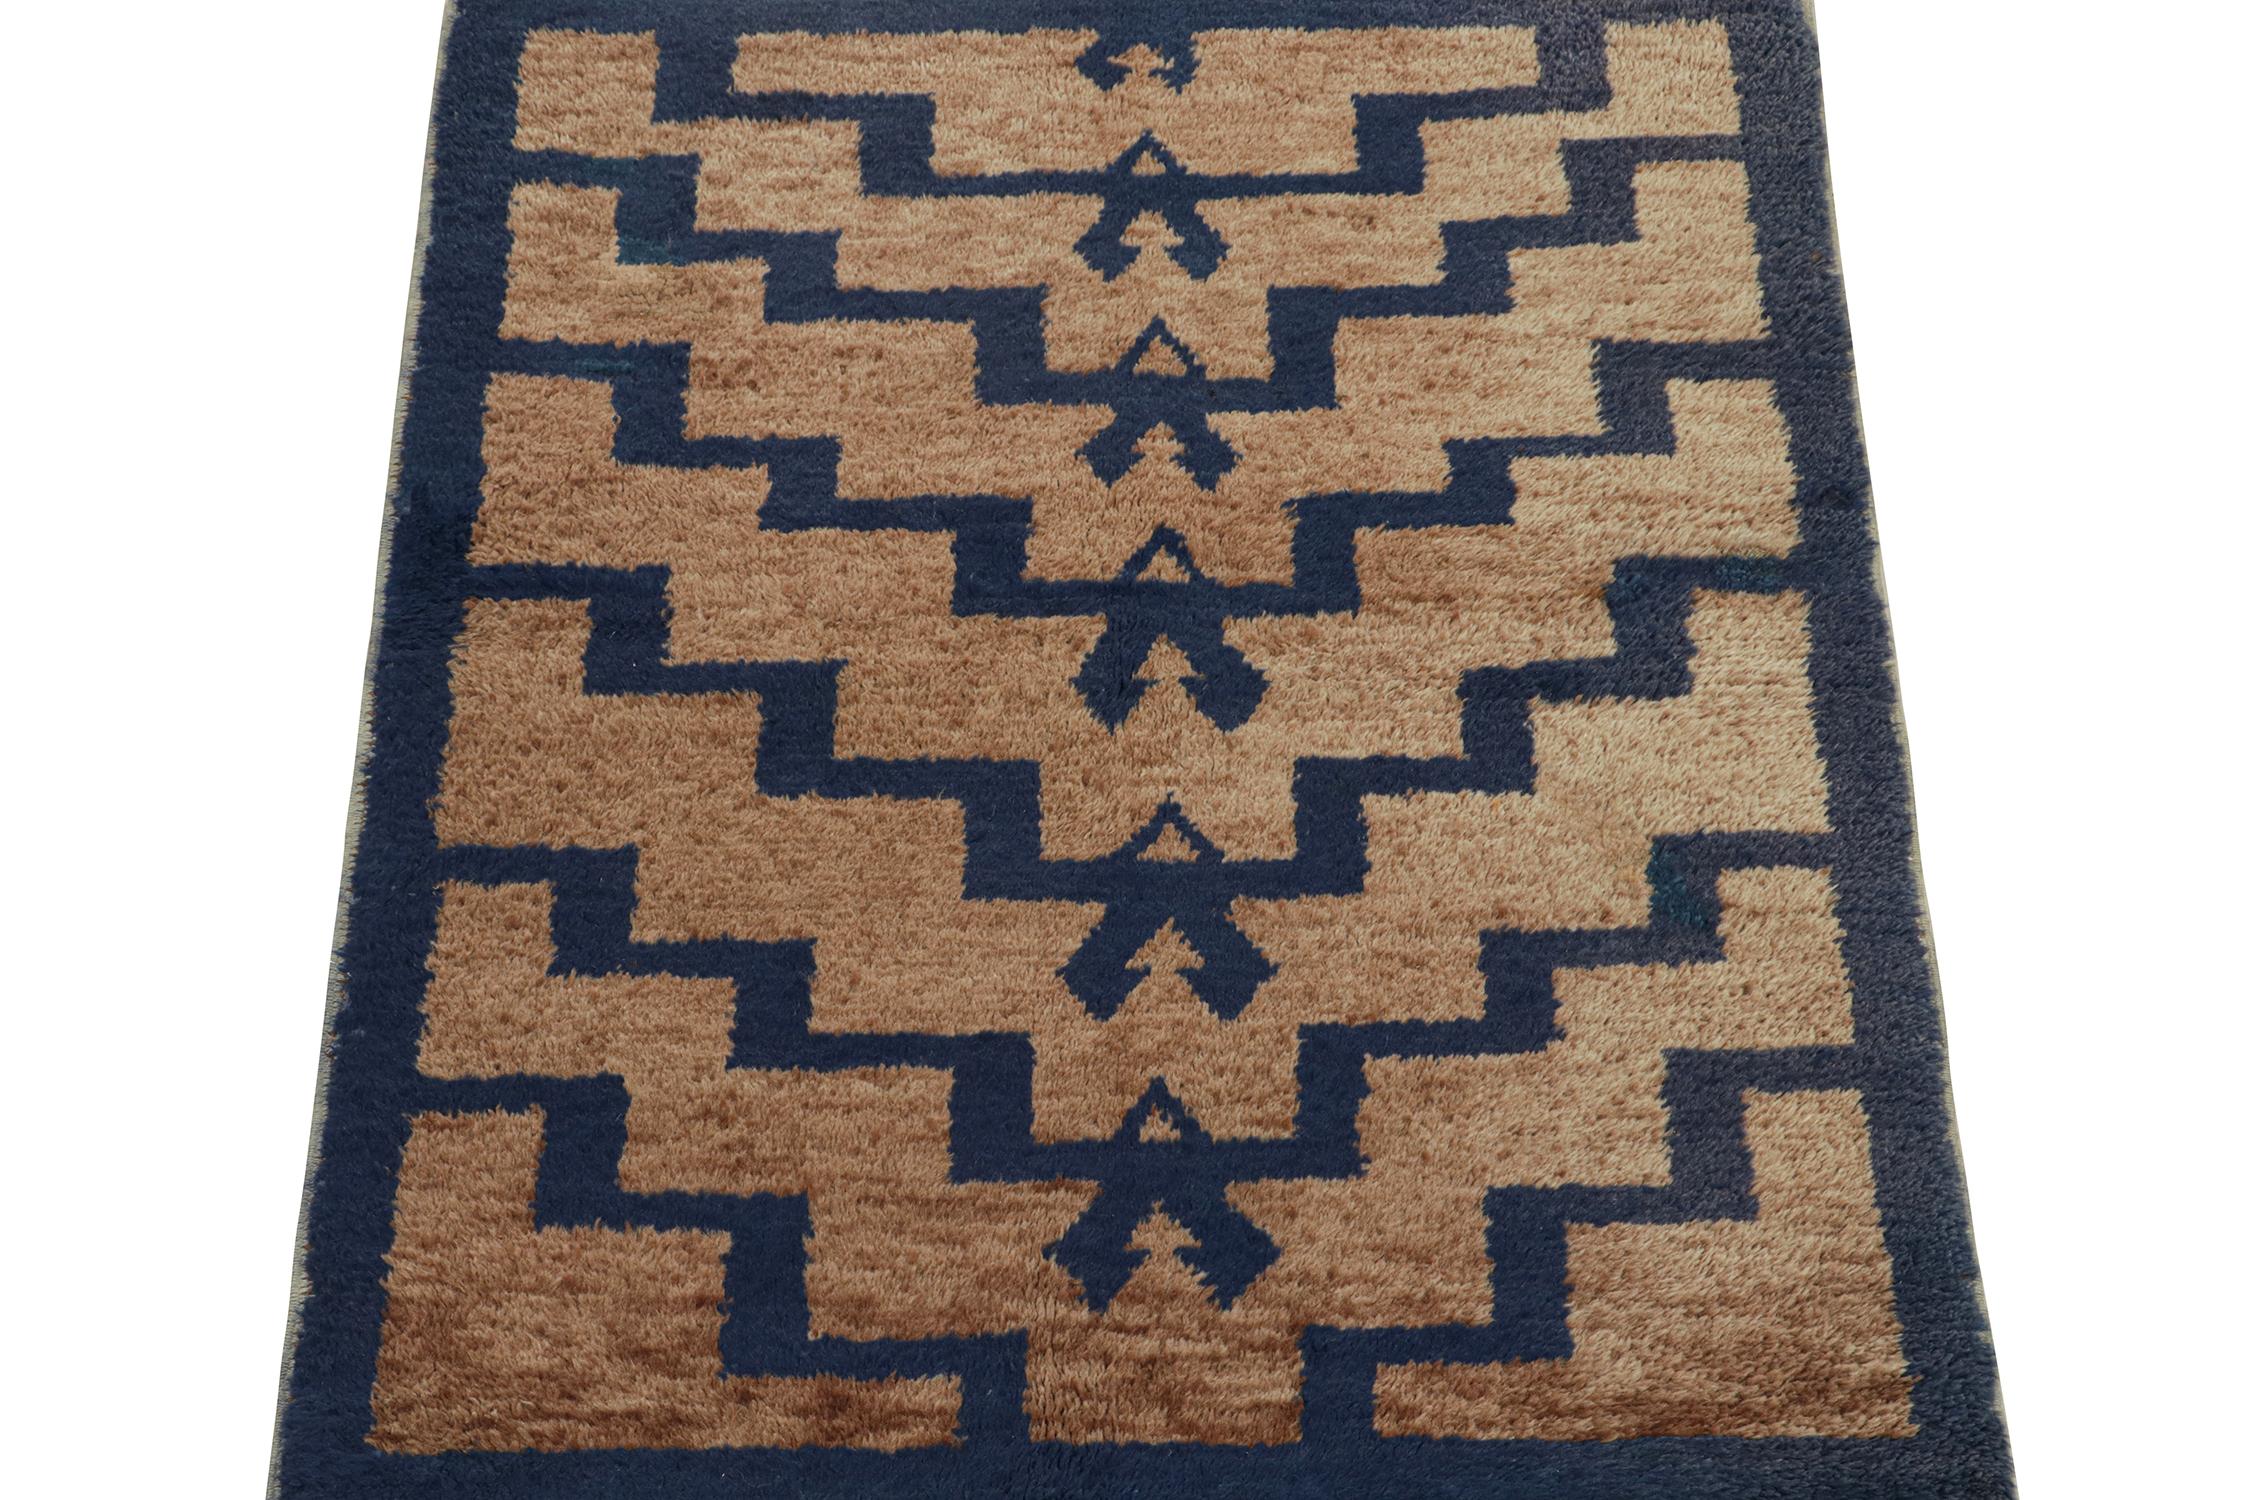 This vintage 3x5 Tulu rug is from the latest entries in Rug & Kilim’s mid-century tribal curations. Hand-knotted in wool from Turkey circa 1950-1960.

Further On the Design:

This tribal provenance is one of the most livable, and collectible